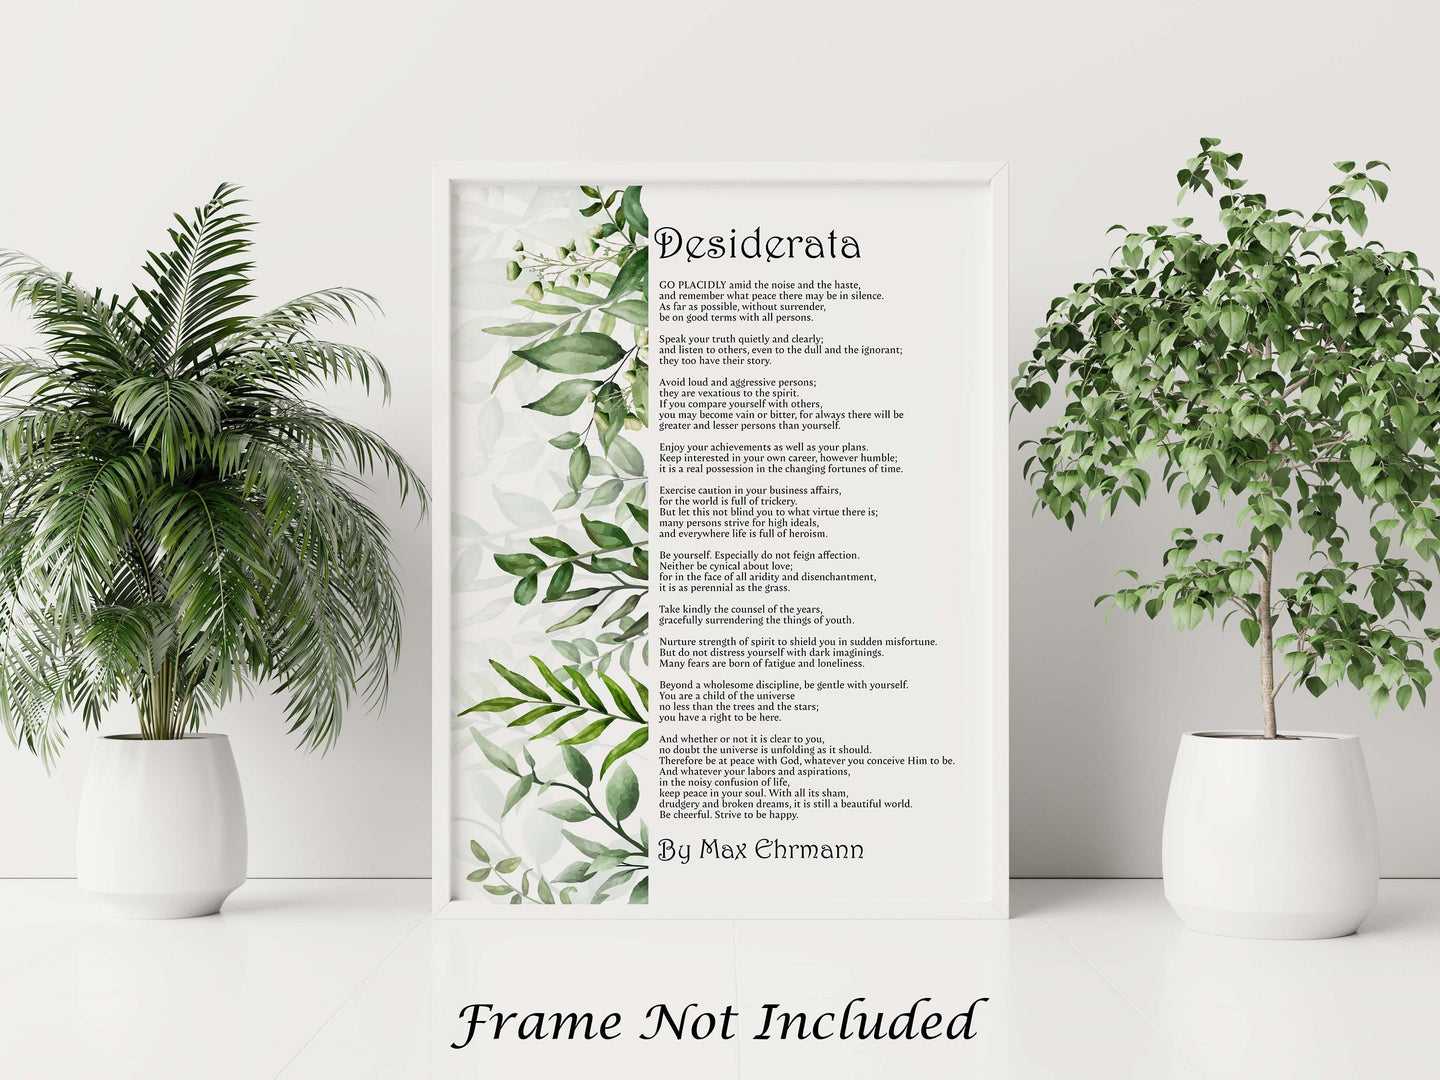 Desiderata Poetry print - Poem By Max Ehrmann - Physical Print Without Frame